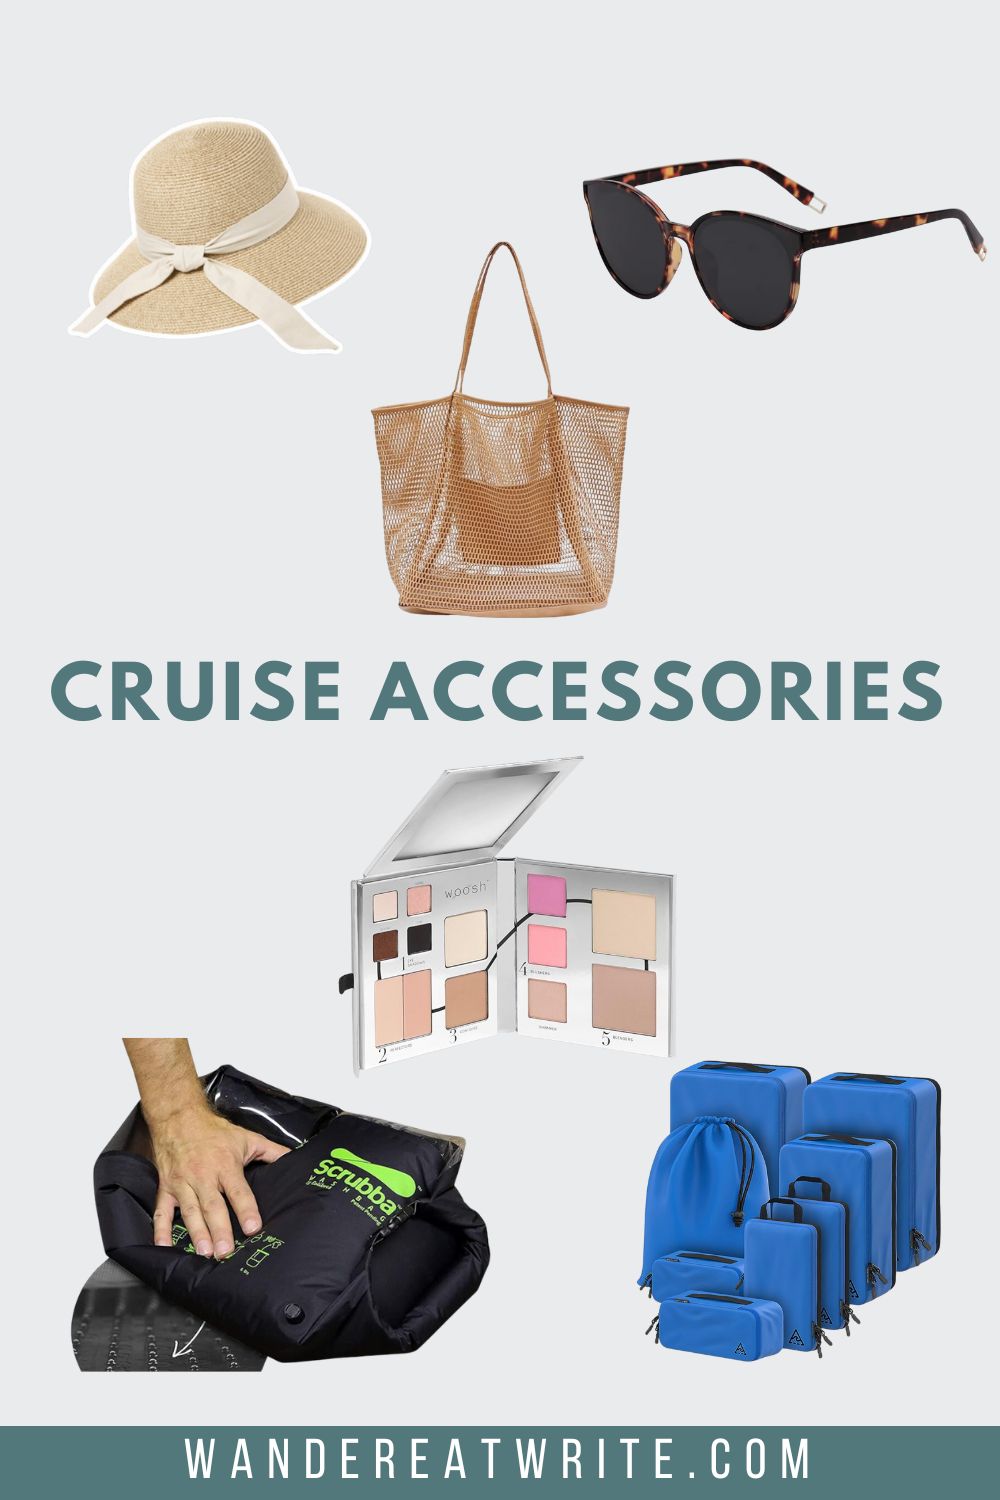 Cruise accessories. Top photos: a wide-brim straw sunhat with a ribbon, tan mesh beach tote, tortoise shell sunglasses. Bottom photos: black scrubba wash bag, all in one makeup palette, blue compression packing cubes